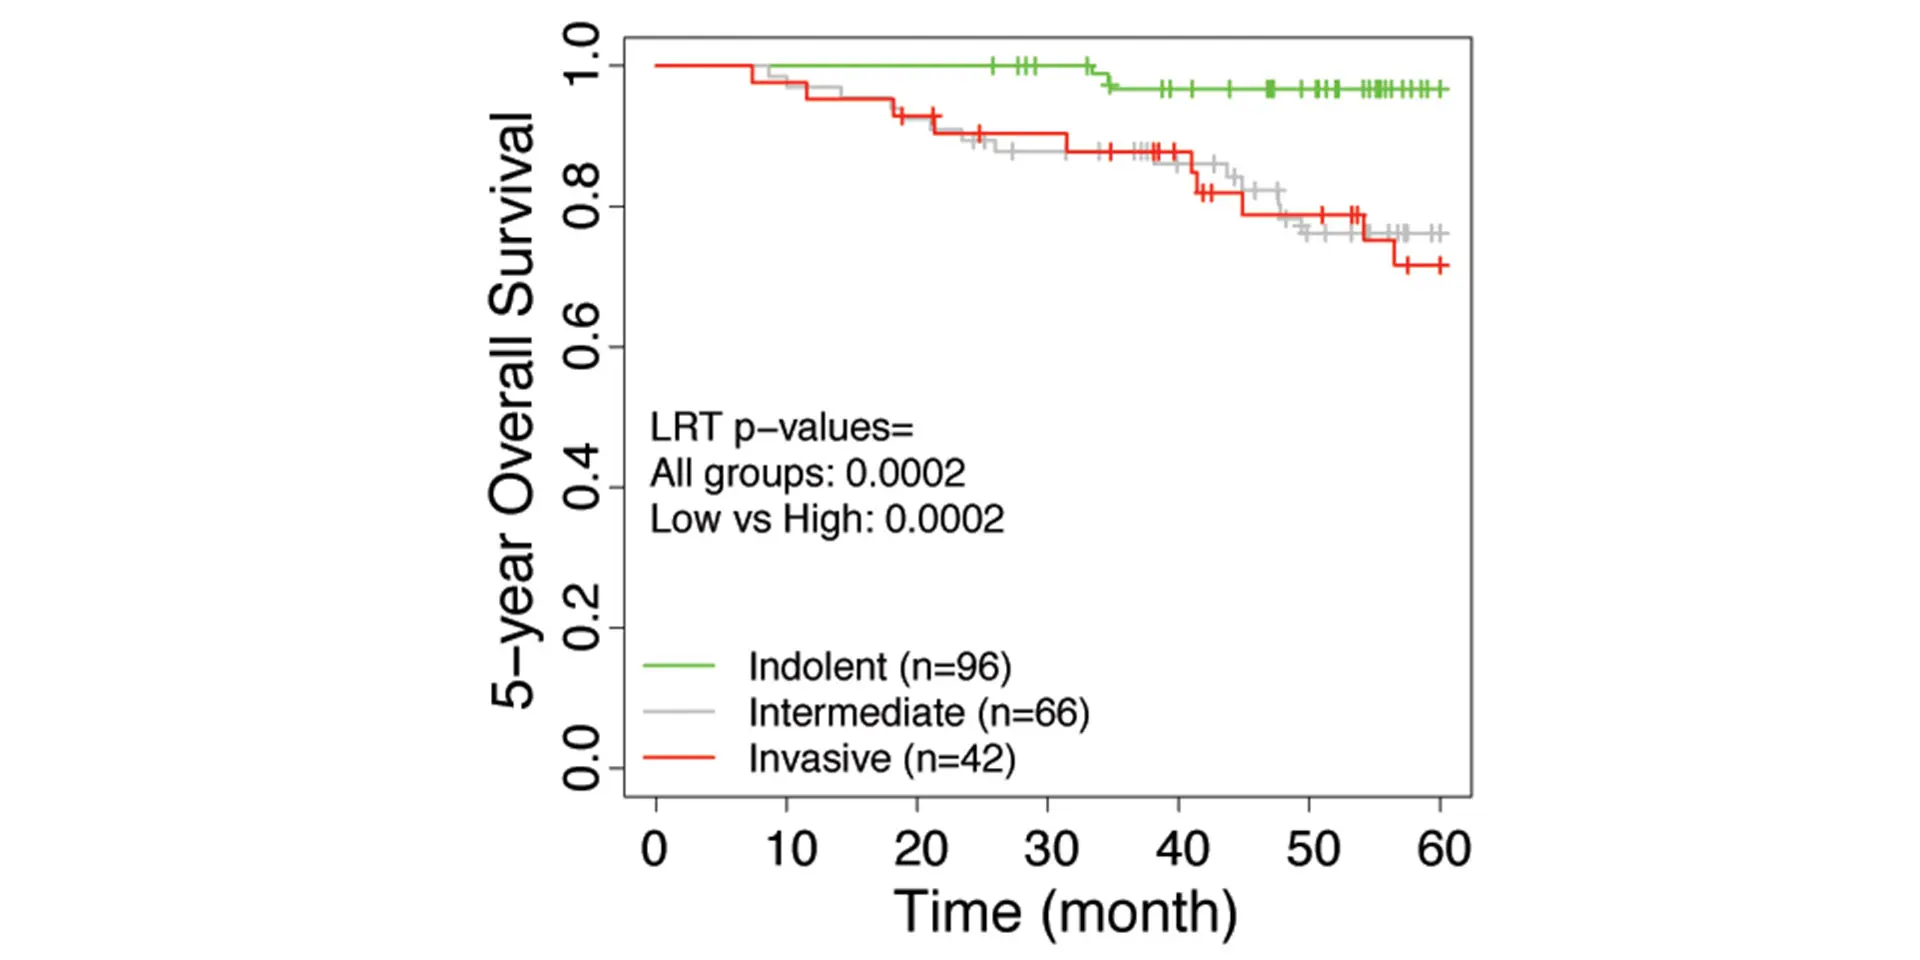 Stratification of tumor samples of each lung adenocarcinoma cohort into three groups based on IVS; invasive (high IVS), intermediate (middle IVS), and indolent (low IVS) tumors. Five-year survival of tumors was shown in a KM curve with corresponding LRT p-values. c) Okayama et al.